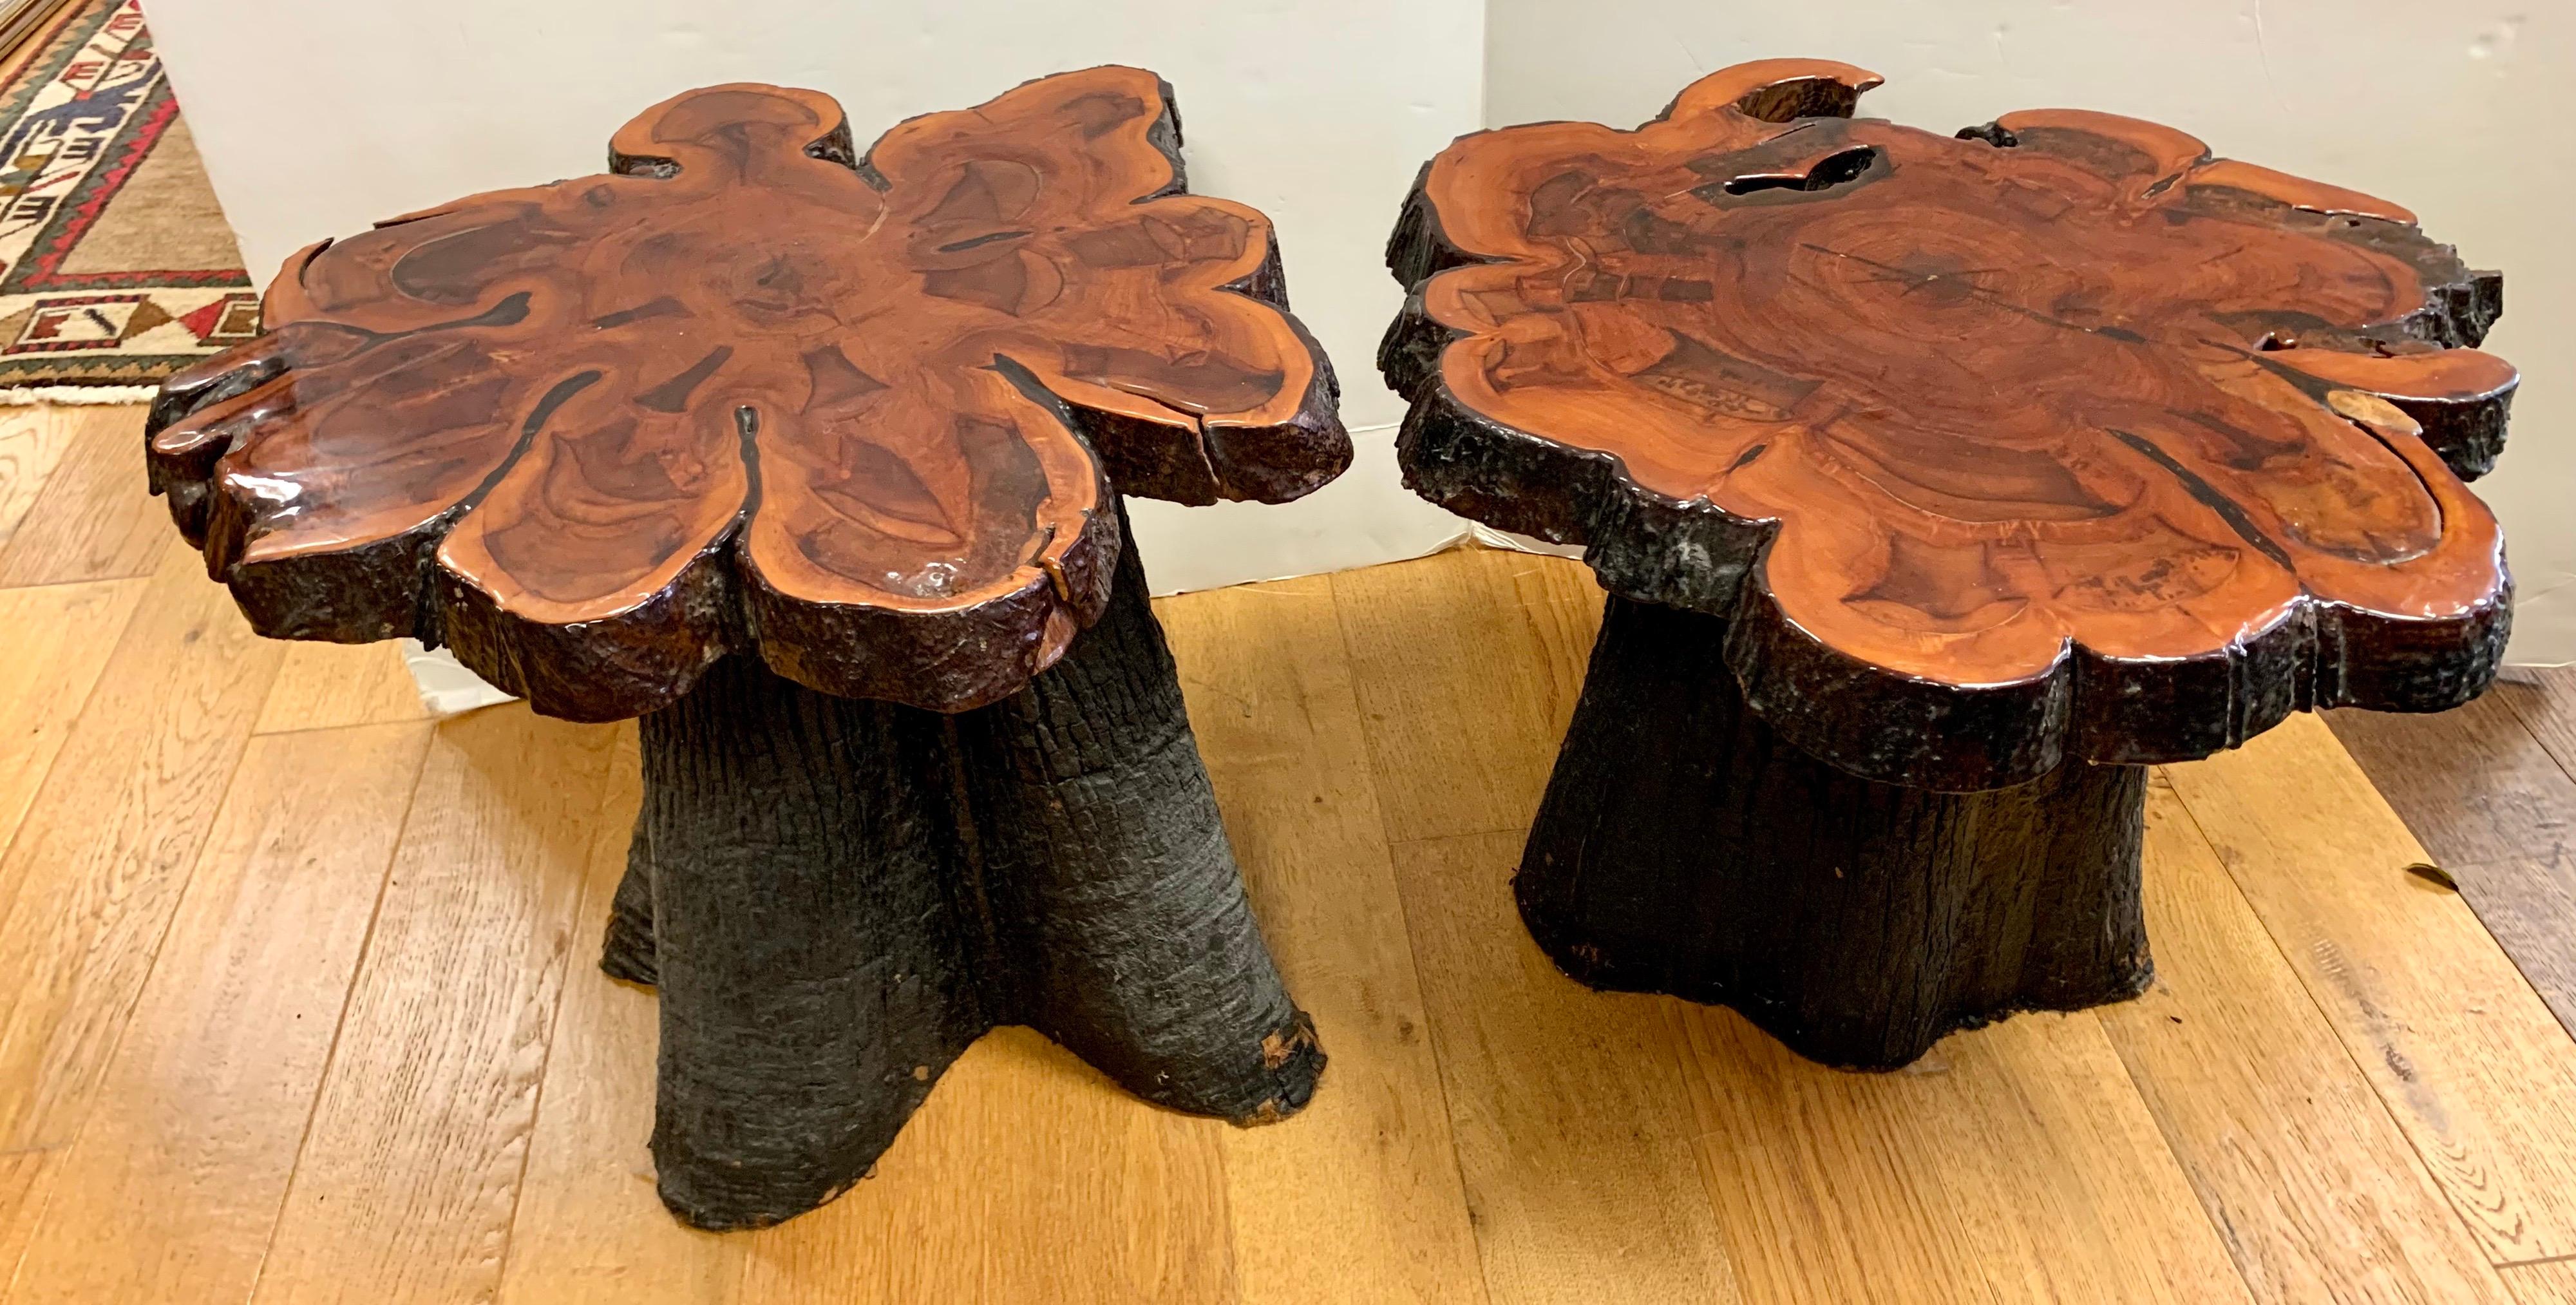 A architectural treasure is this pair of organic modern live edge end tables made of a single slab of wood with a tree trunk base.